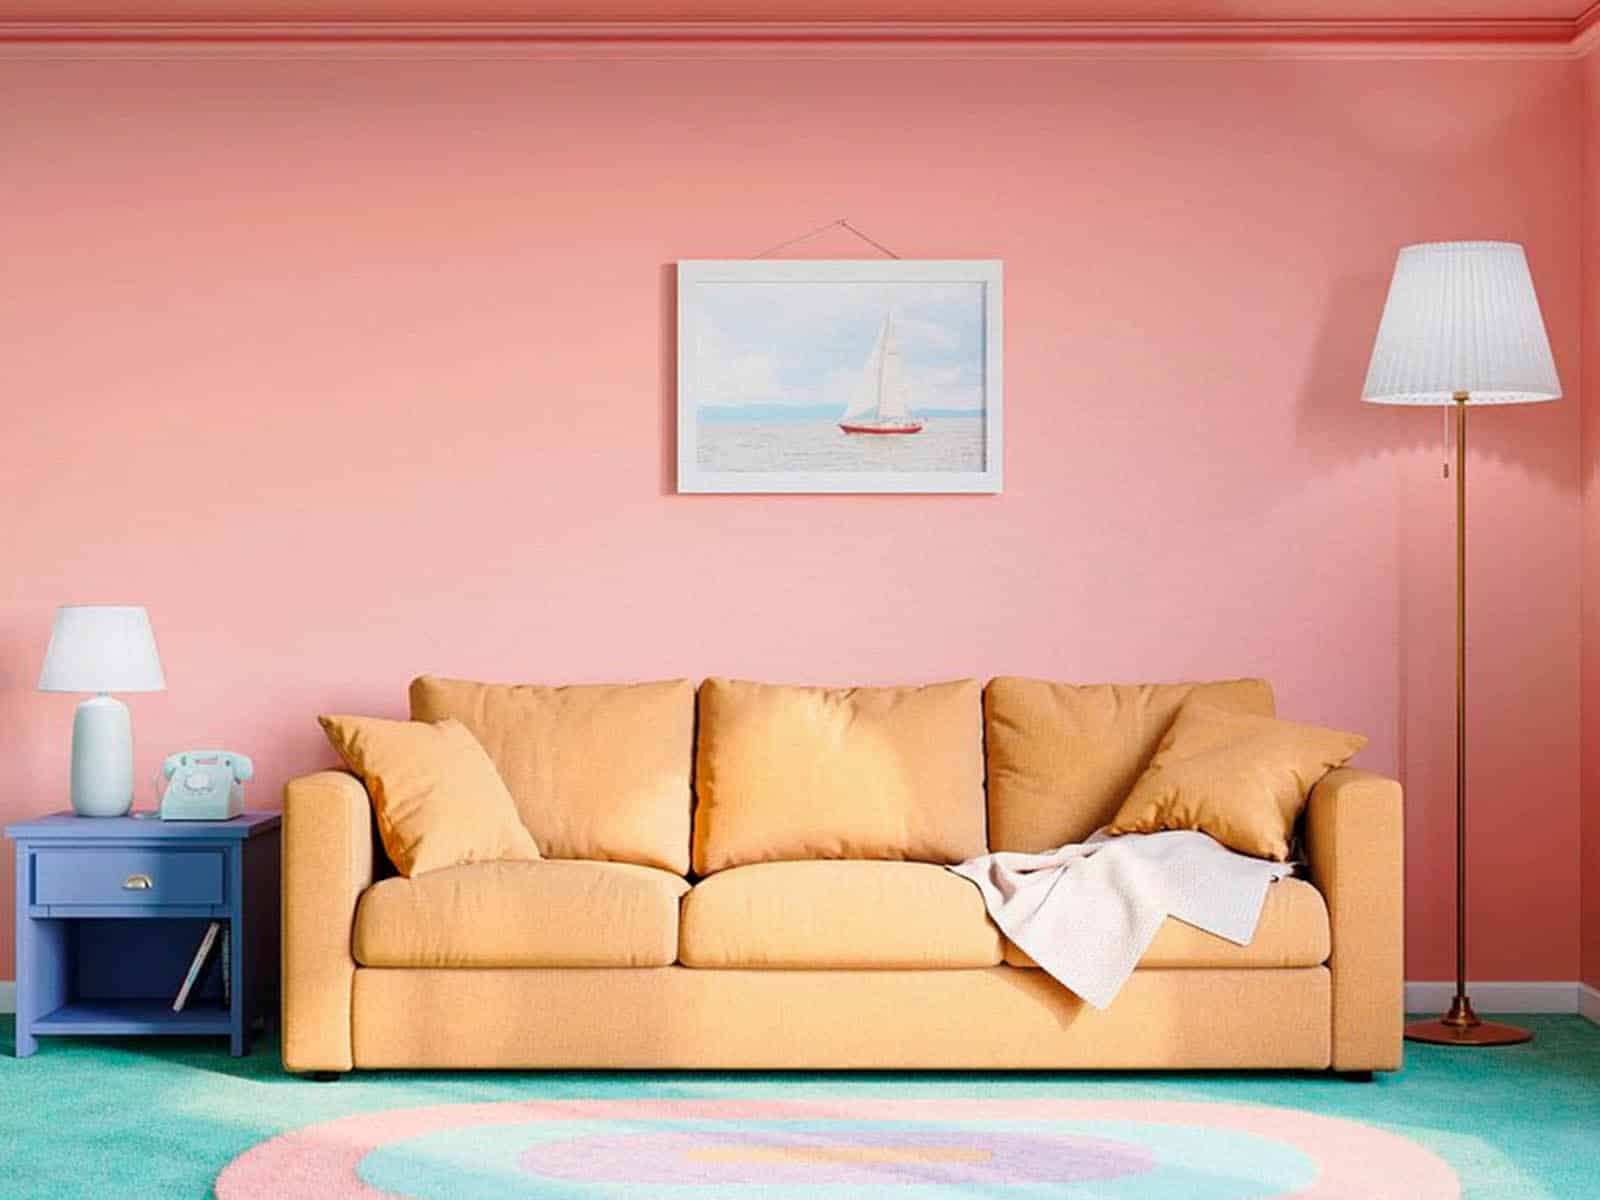 Have you ever wondered what “The Simpsons” living room would look like in real life?